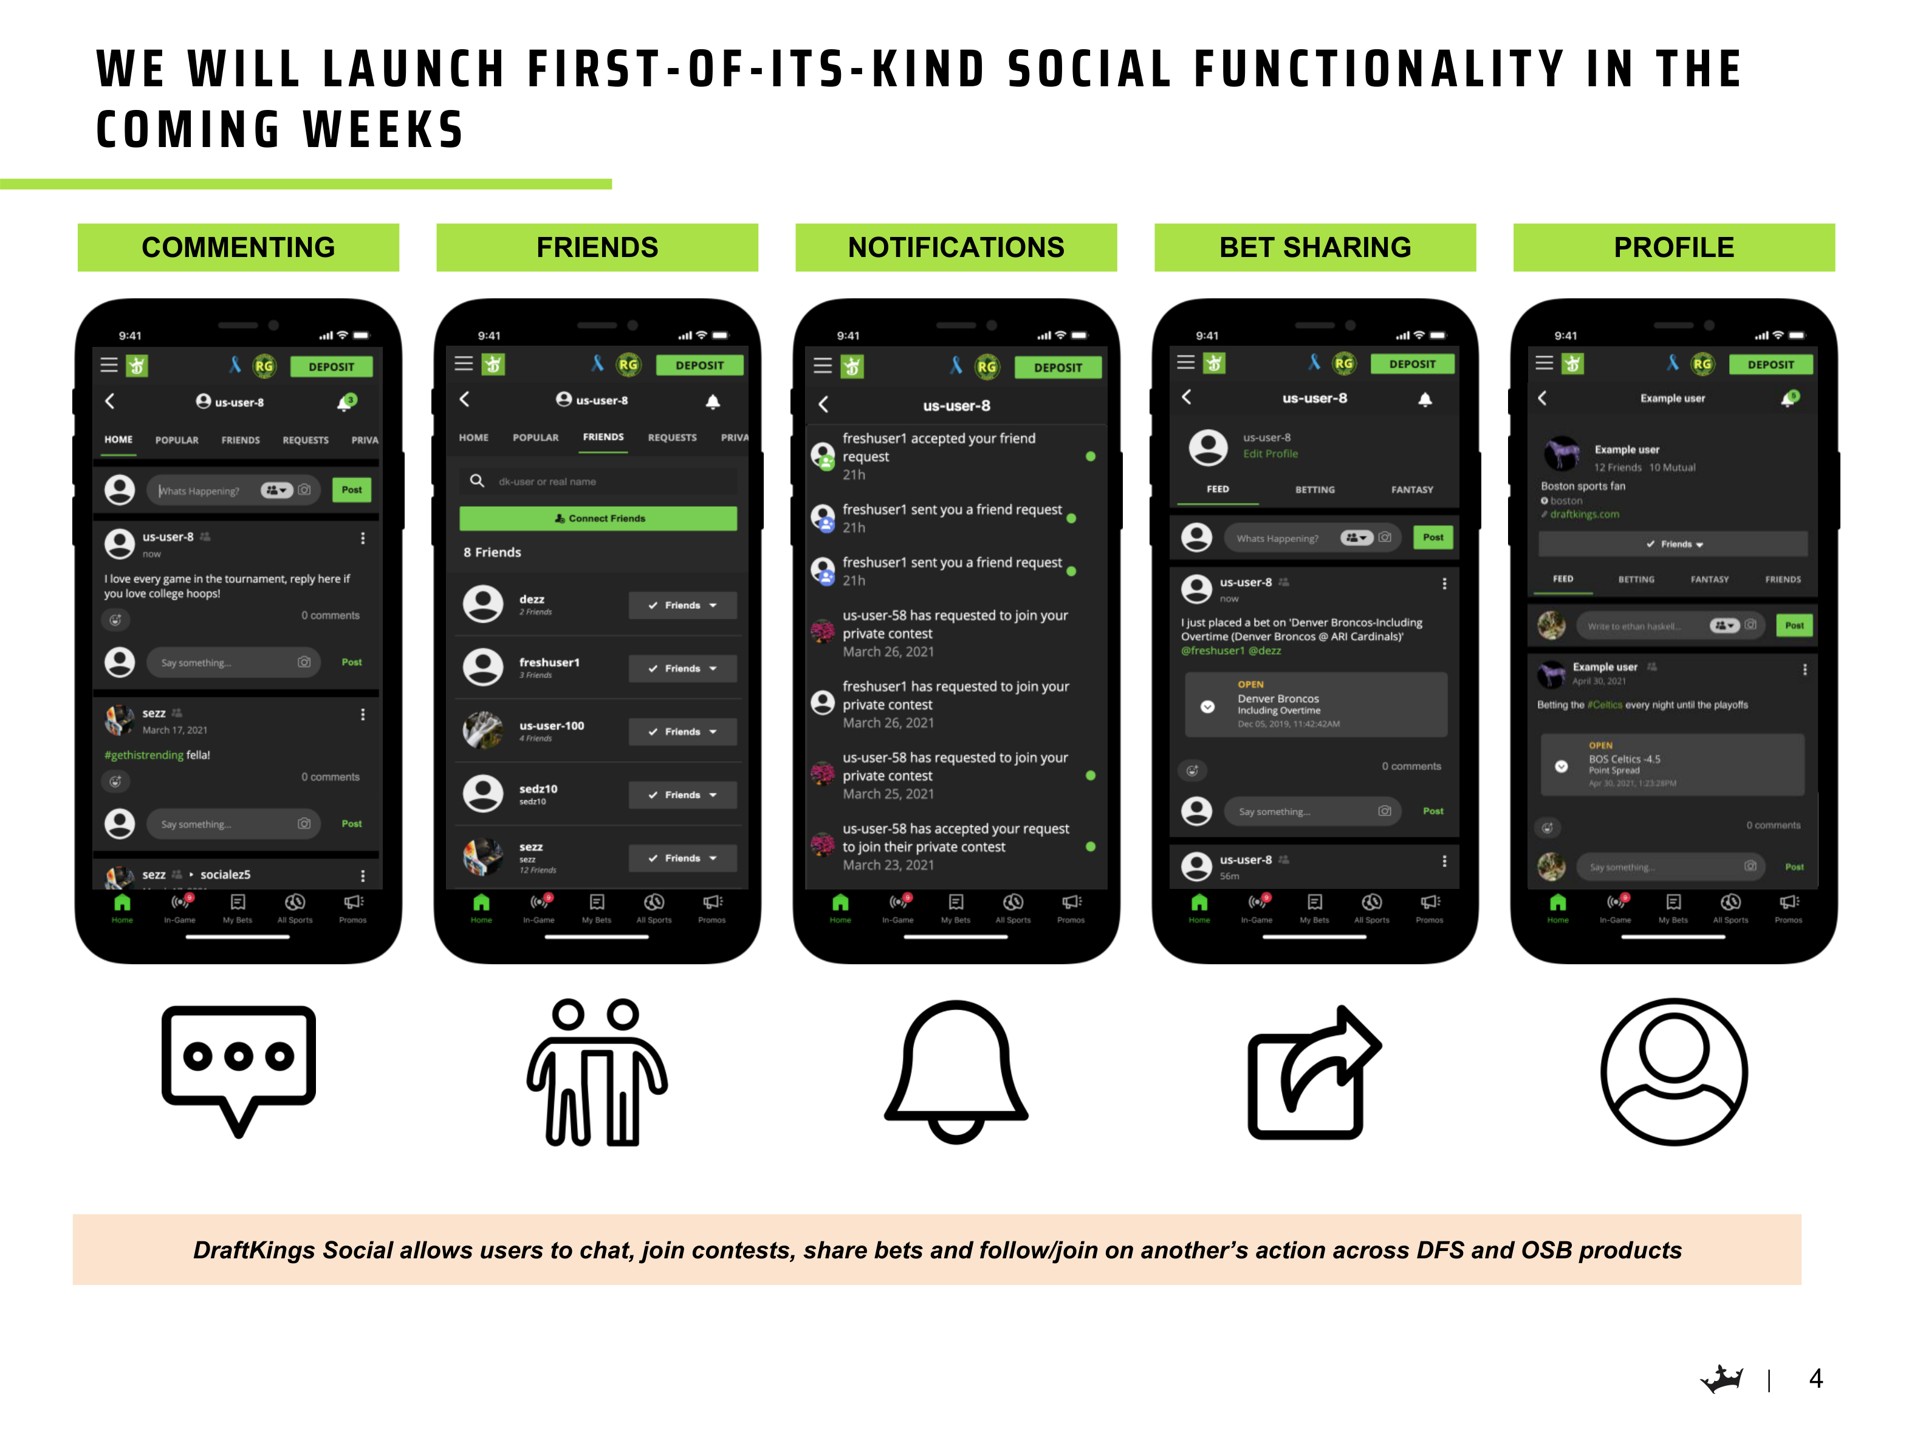 i a i i i i a i a i i i we will launch first of its kind social functionality in the coming weeks | DraftKings